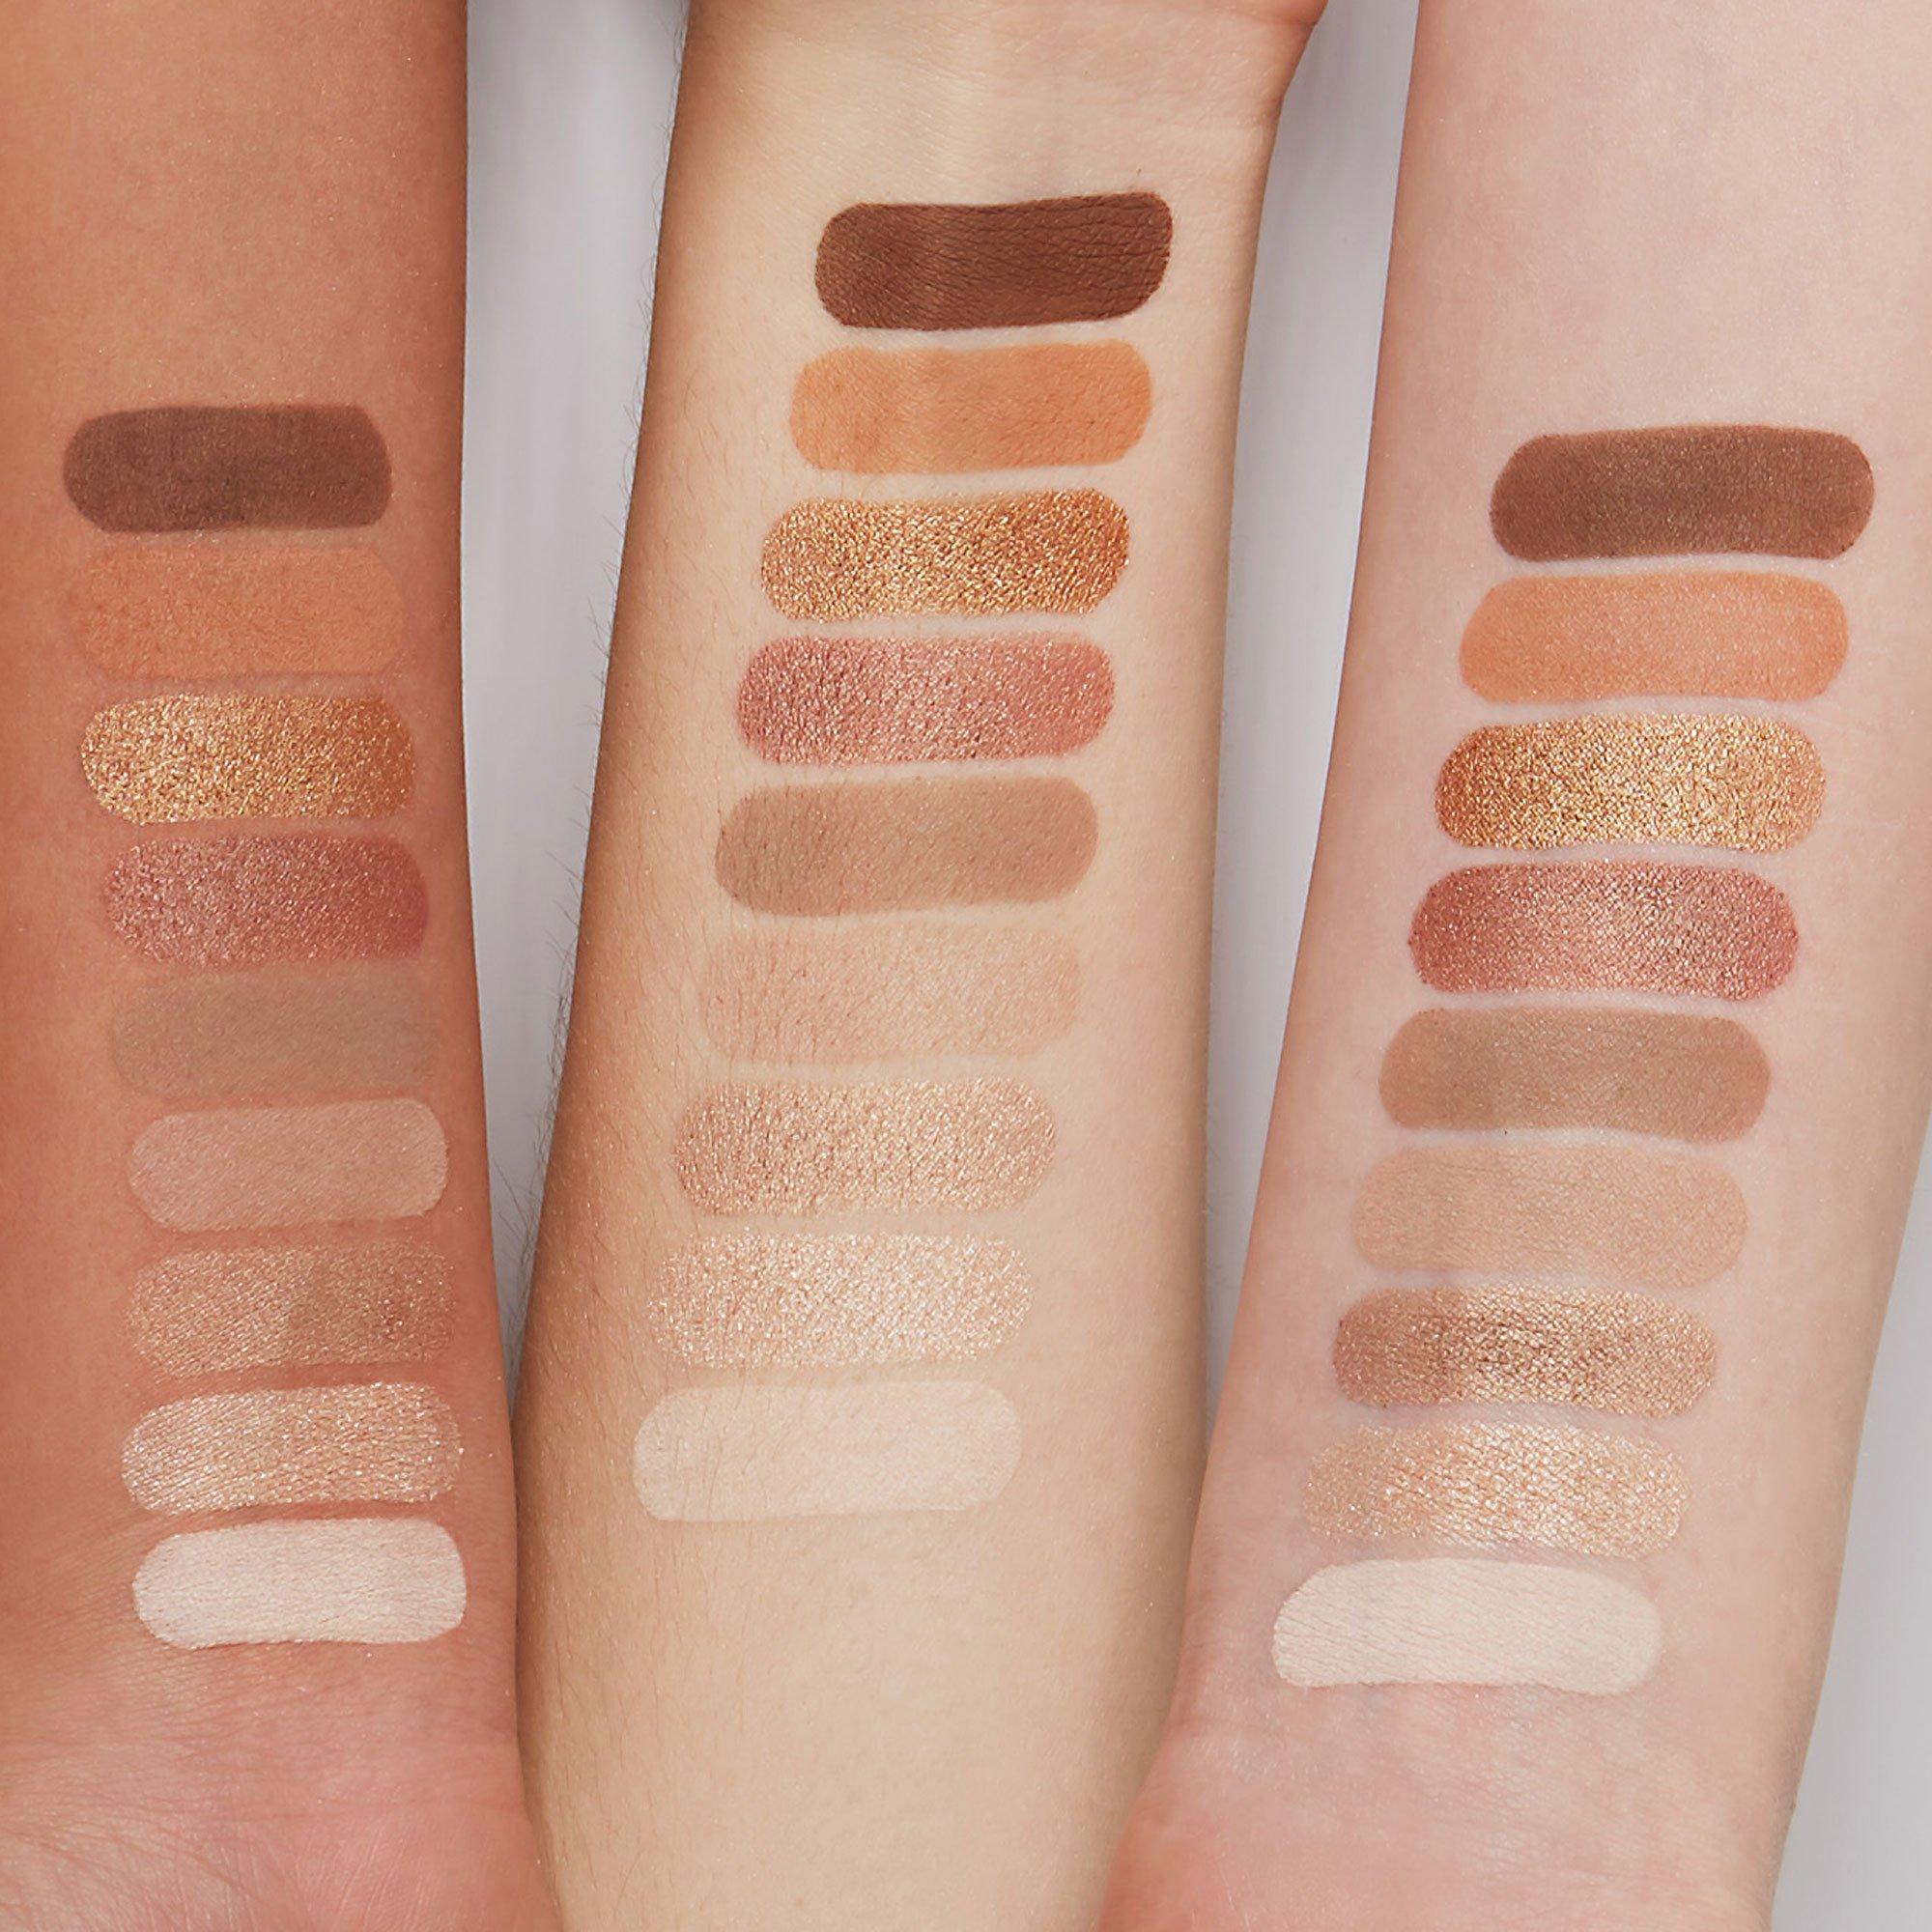 the NUDE edition eyeshadow palette